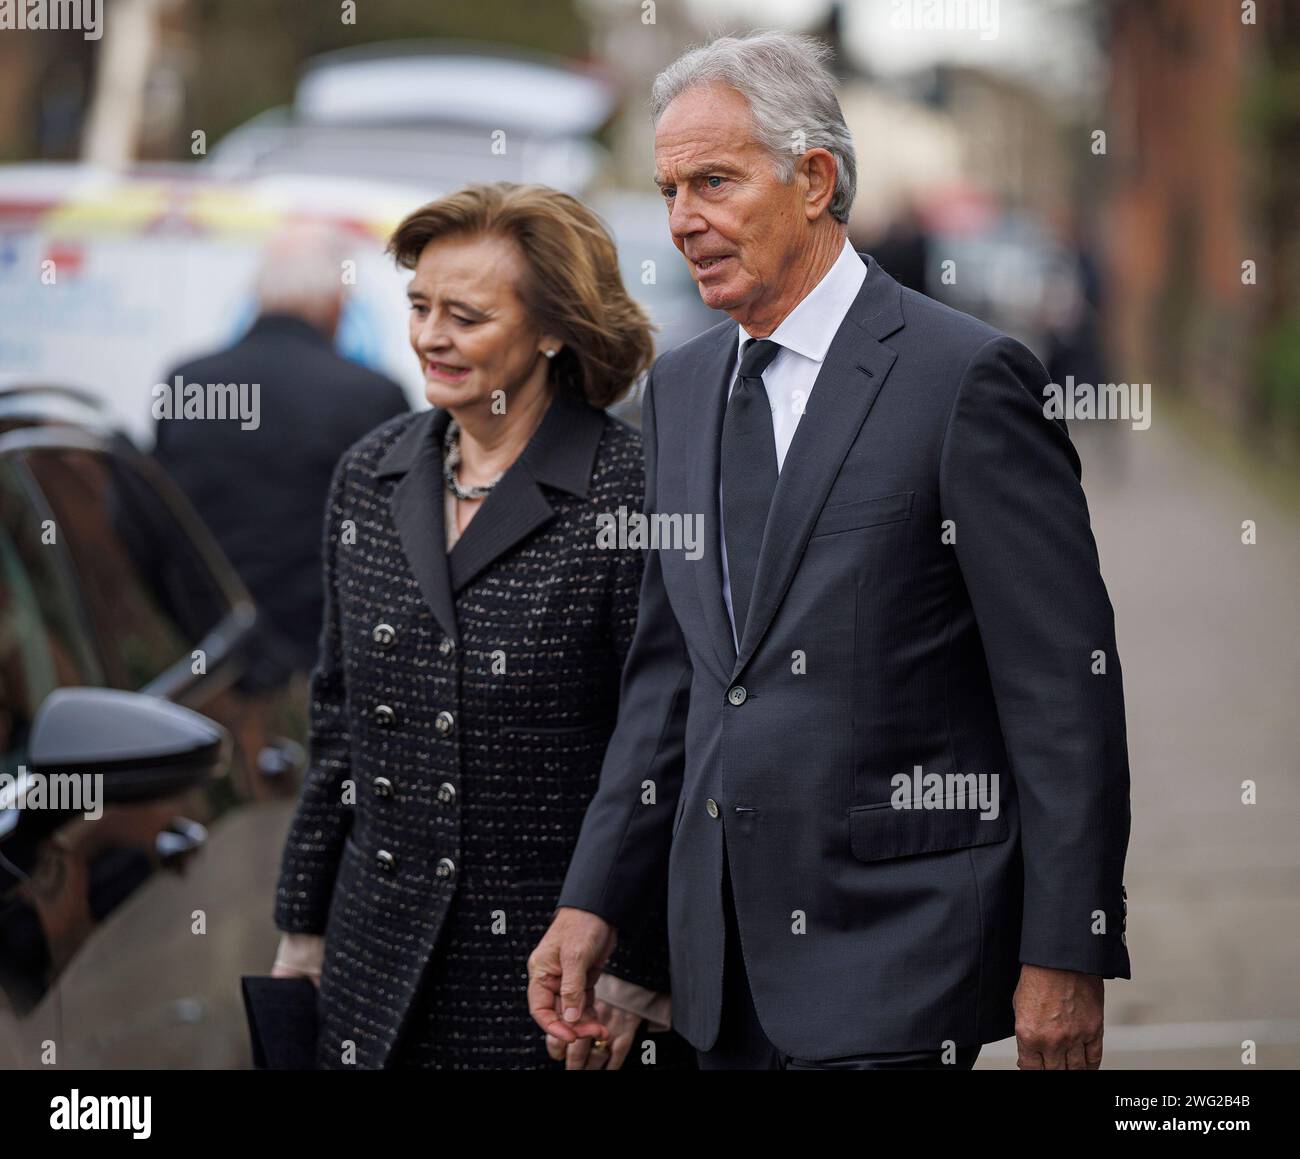 London, UK. 02nd Feb, 2024. Former British Prime Minister Tony Blair and wife Cherie Blair leave the funeral of Derek Draper at The Church of St Mary the Virgin, Primrose Hill in North London. Derek Draper, a former political lobbyist and husband of television presenter Kate Garraway, died following a long illness caused by COVI-19 infection. Photo credit: Ben Cawthra/Sipa USA Credit: Sipa USA/Alamy Live News Stock Photo